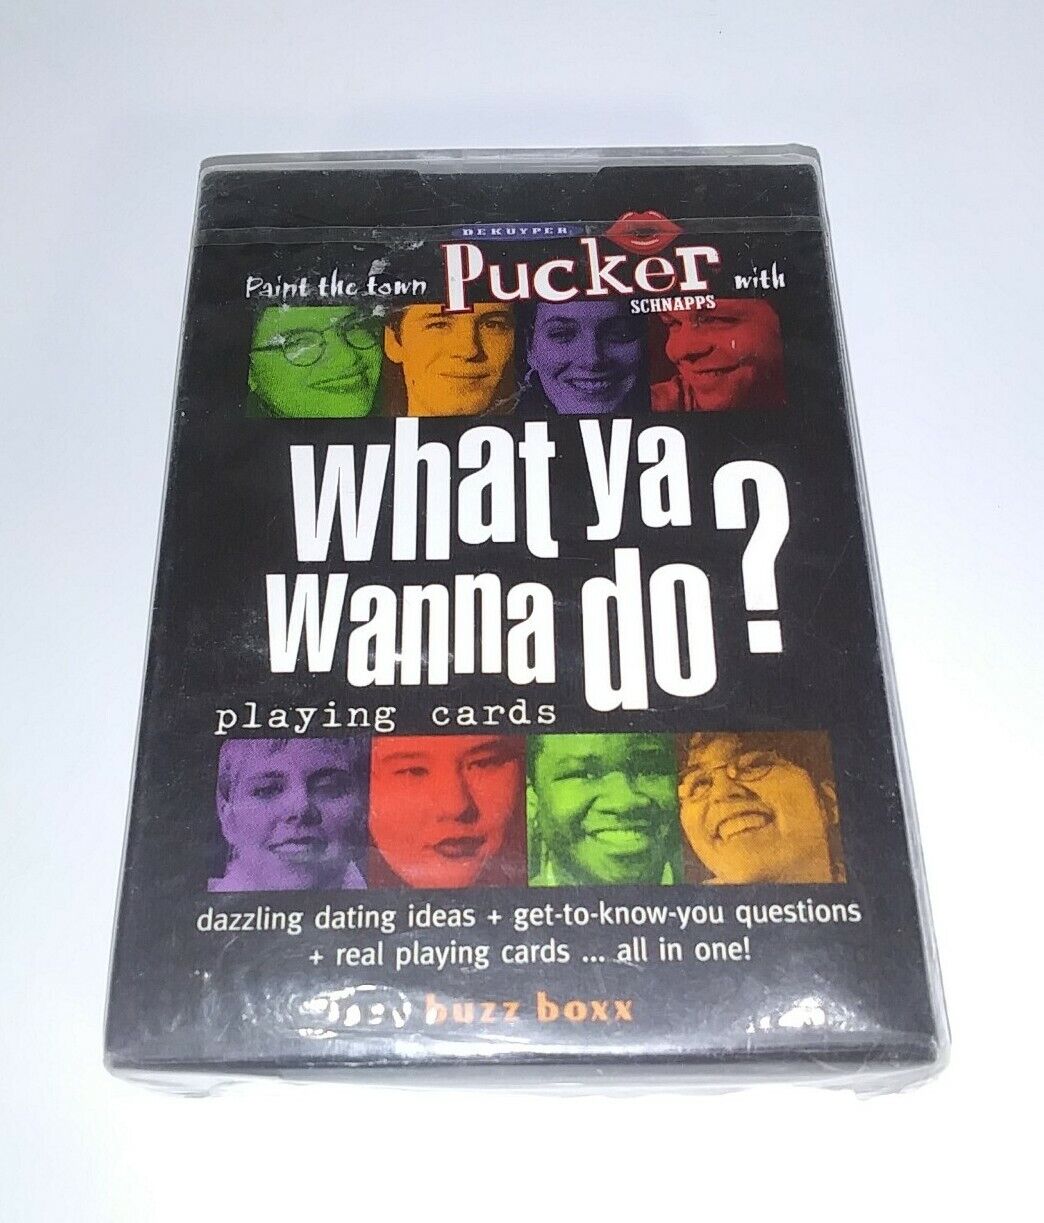 Pucker Schnapps Deck Of Dating/ Playing Cards "what Ya Wanna Do?" By Dekuyper